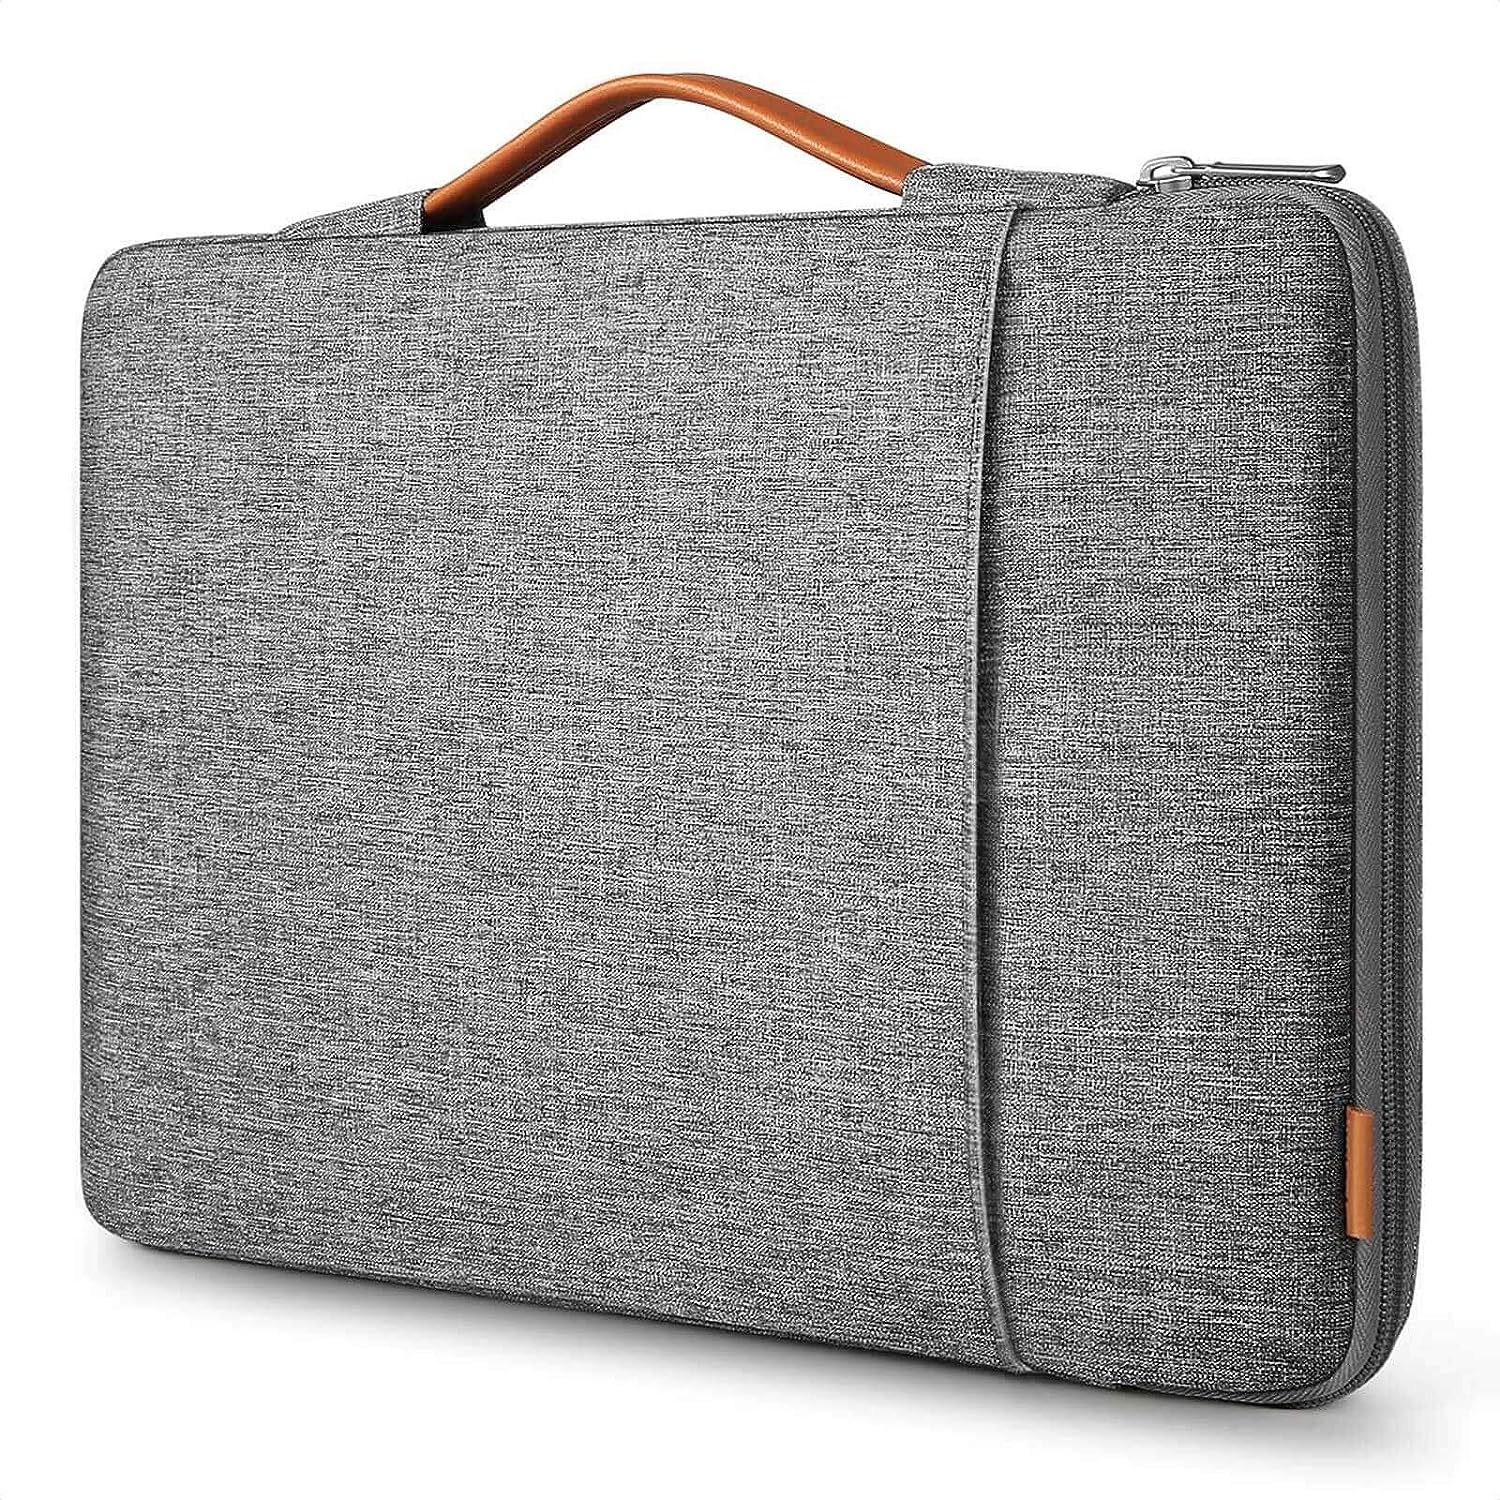 Inateck 13-13.5 Inch 360 Protective Laptop Sleeve Carrying Case Bag Compatible w - $40.99